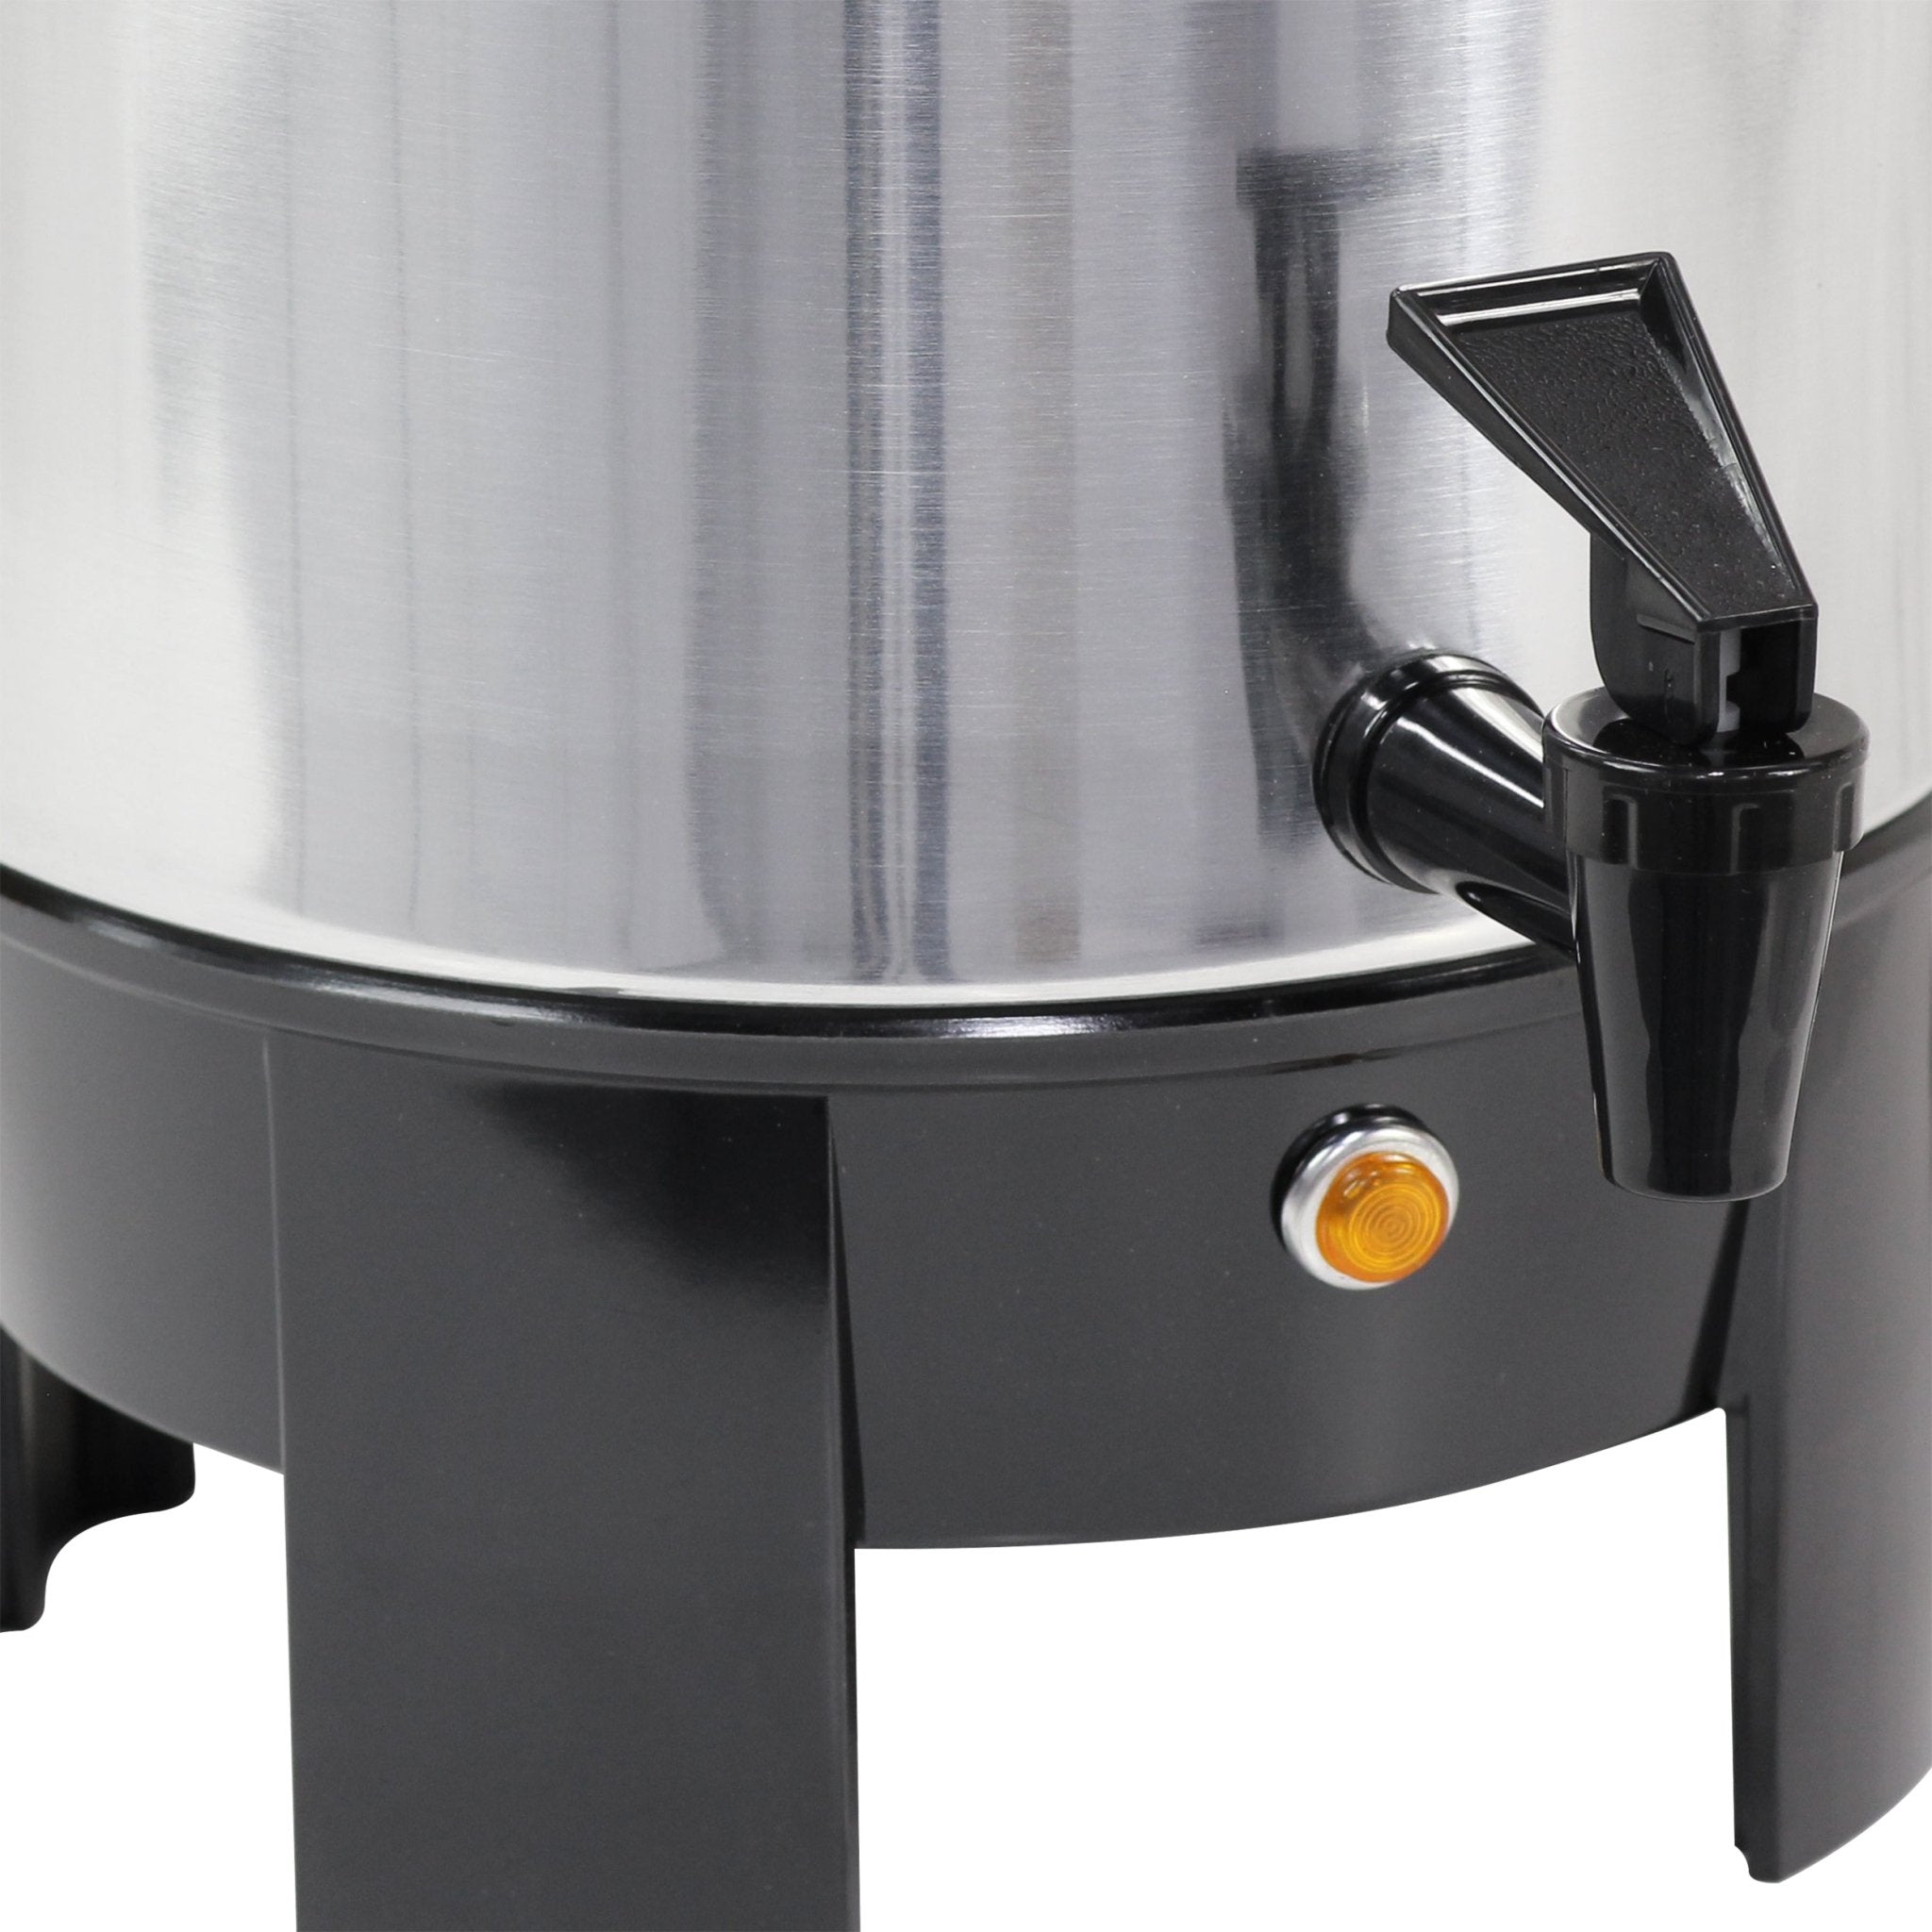 West Bend 58030 Coffee Urn, 30 cup capacity, manual fill, 120v/50/60/1